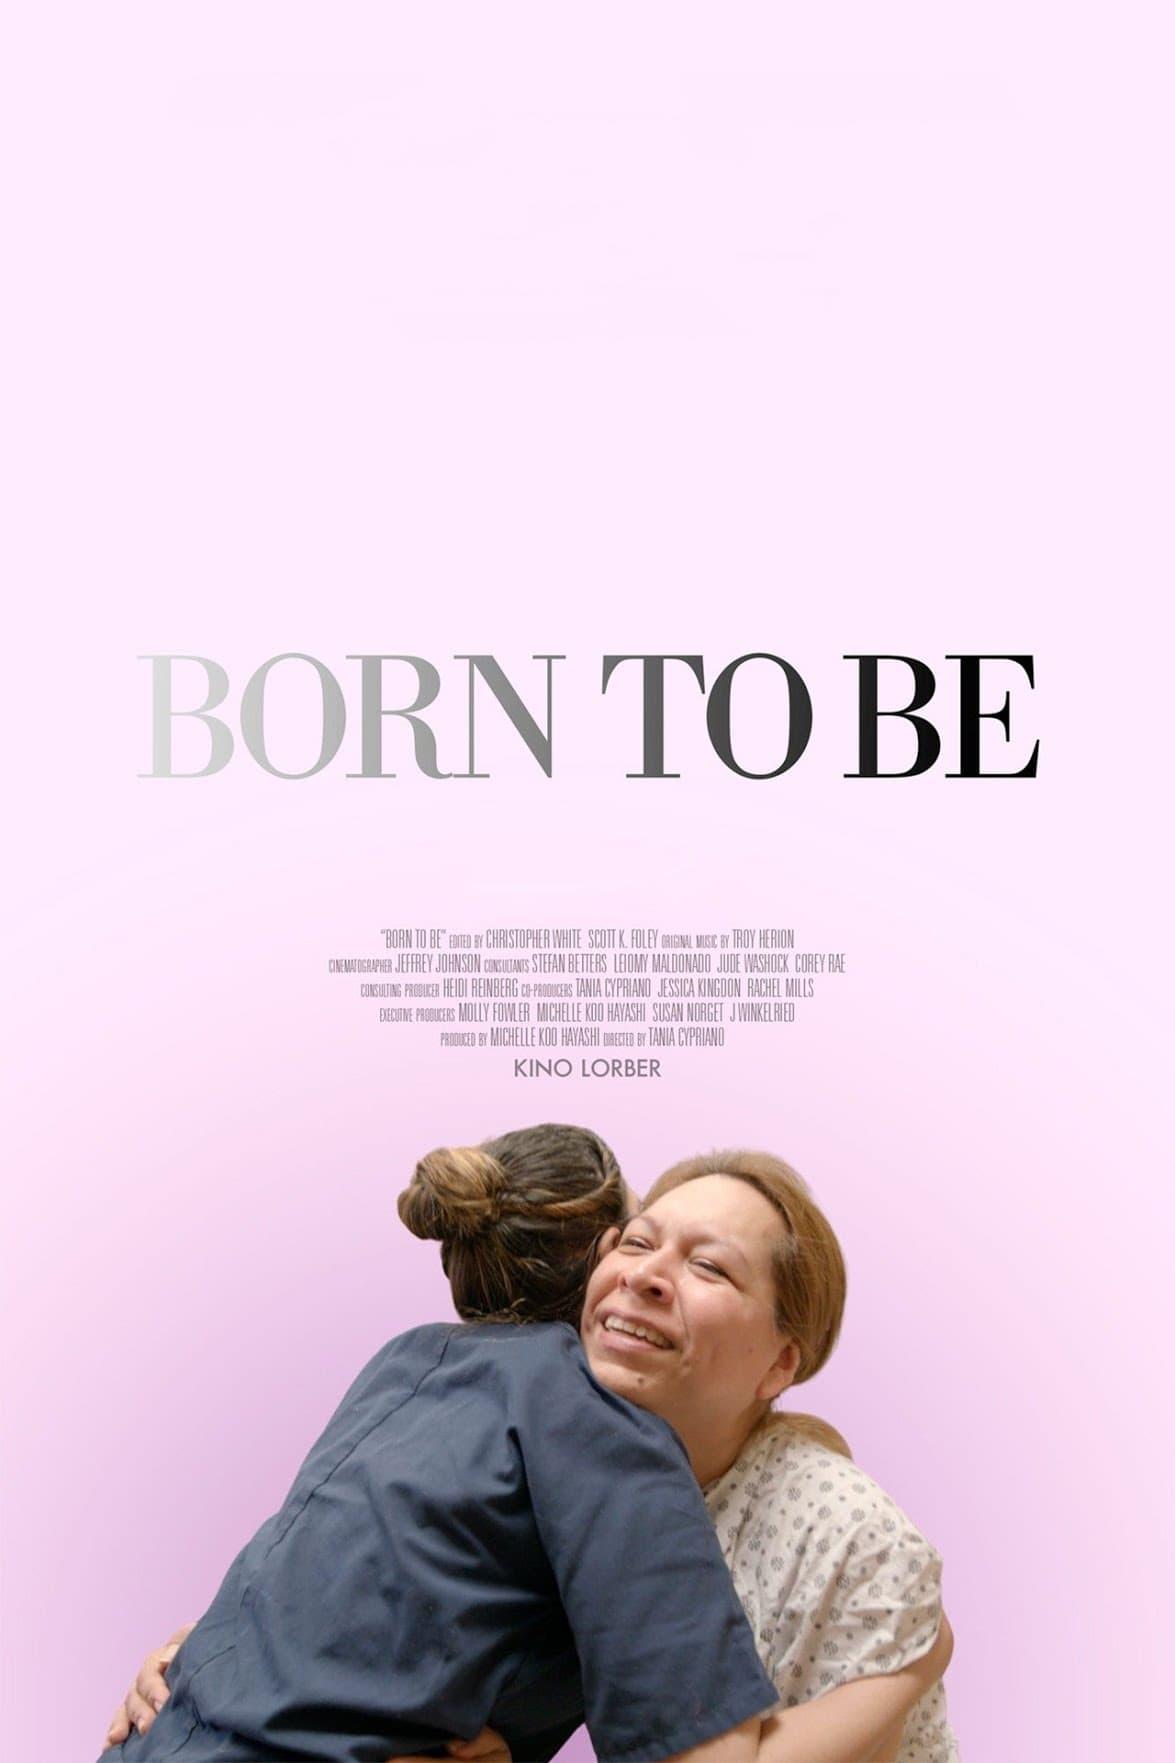 Born to Be poster